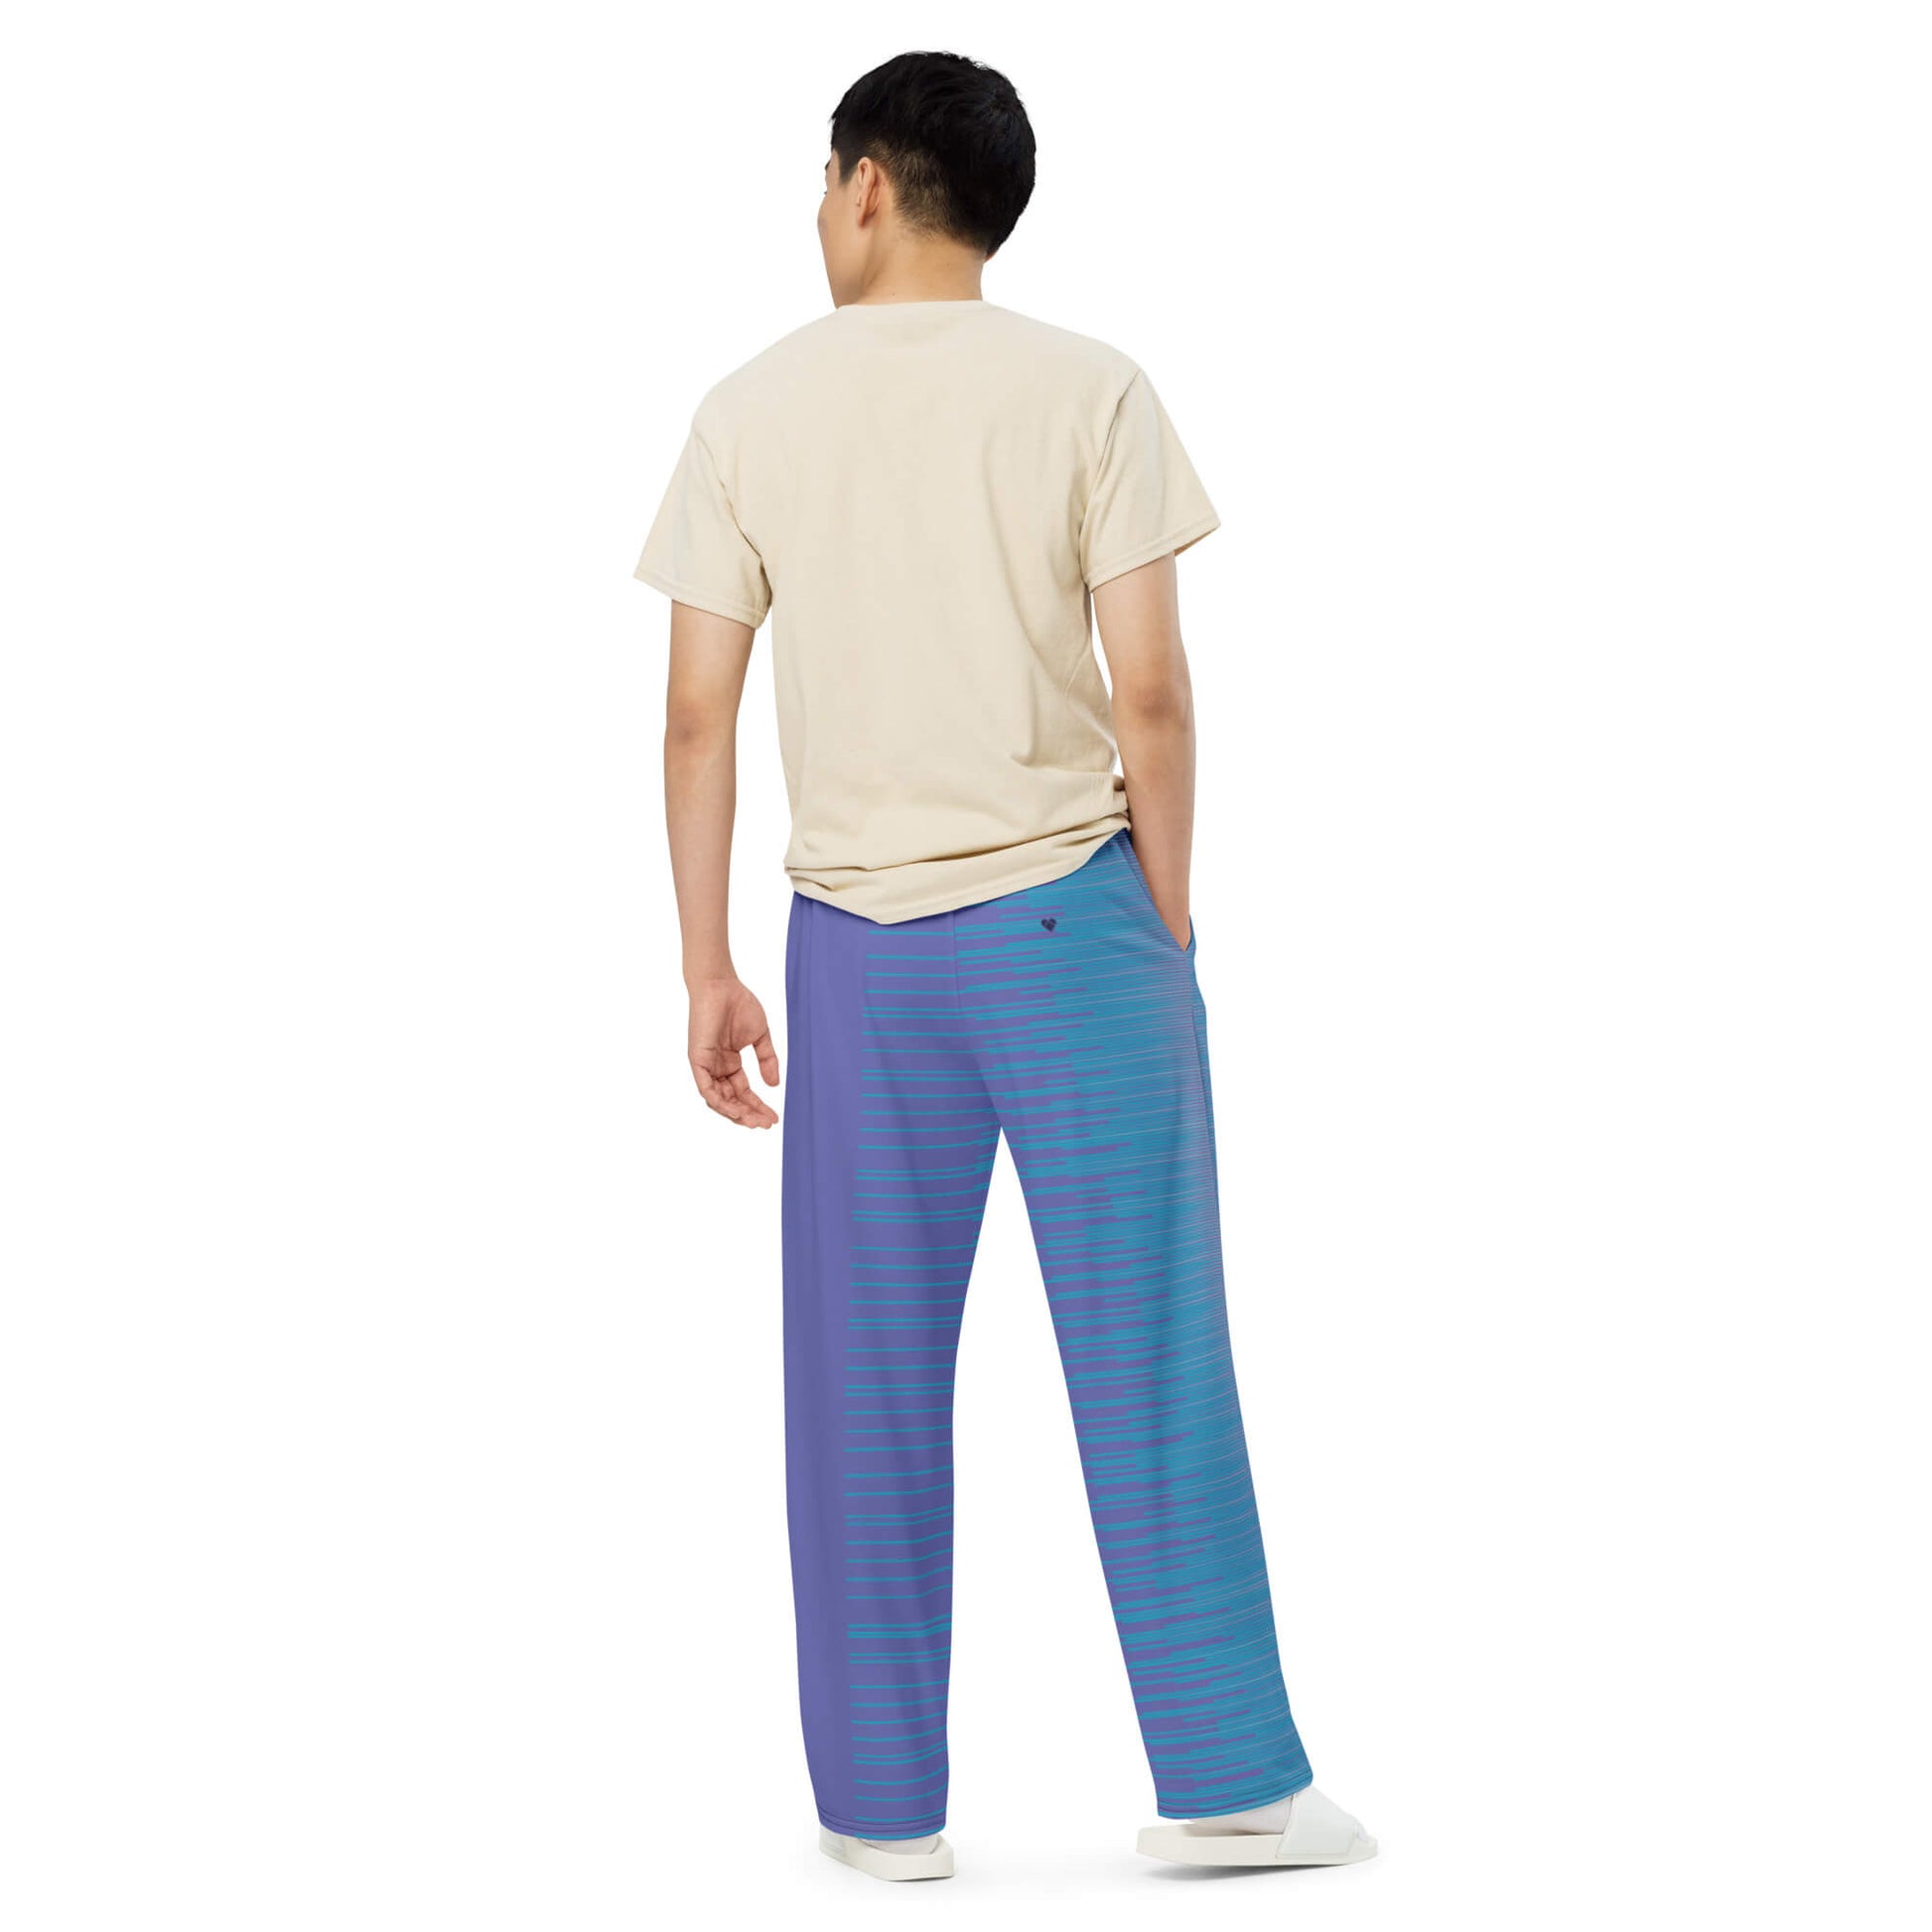 Turquoise gradient stripes adorn Periwinkle Stripes Dual Pants from CRiZ AMOR